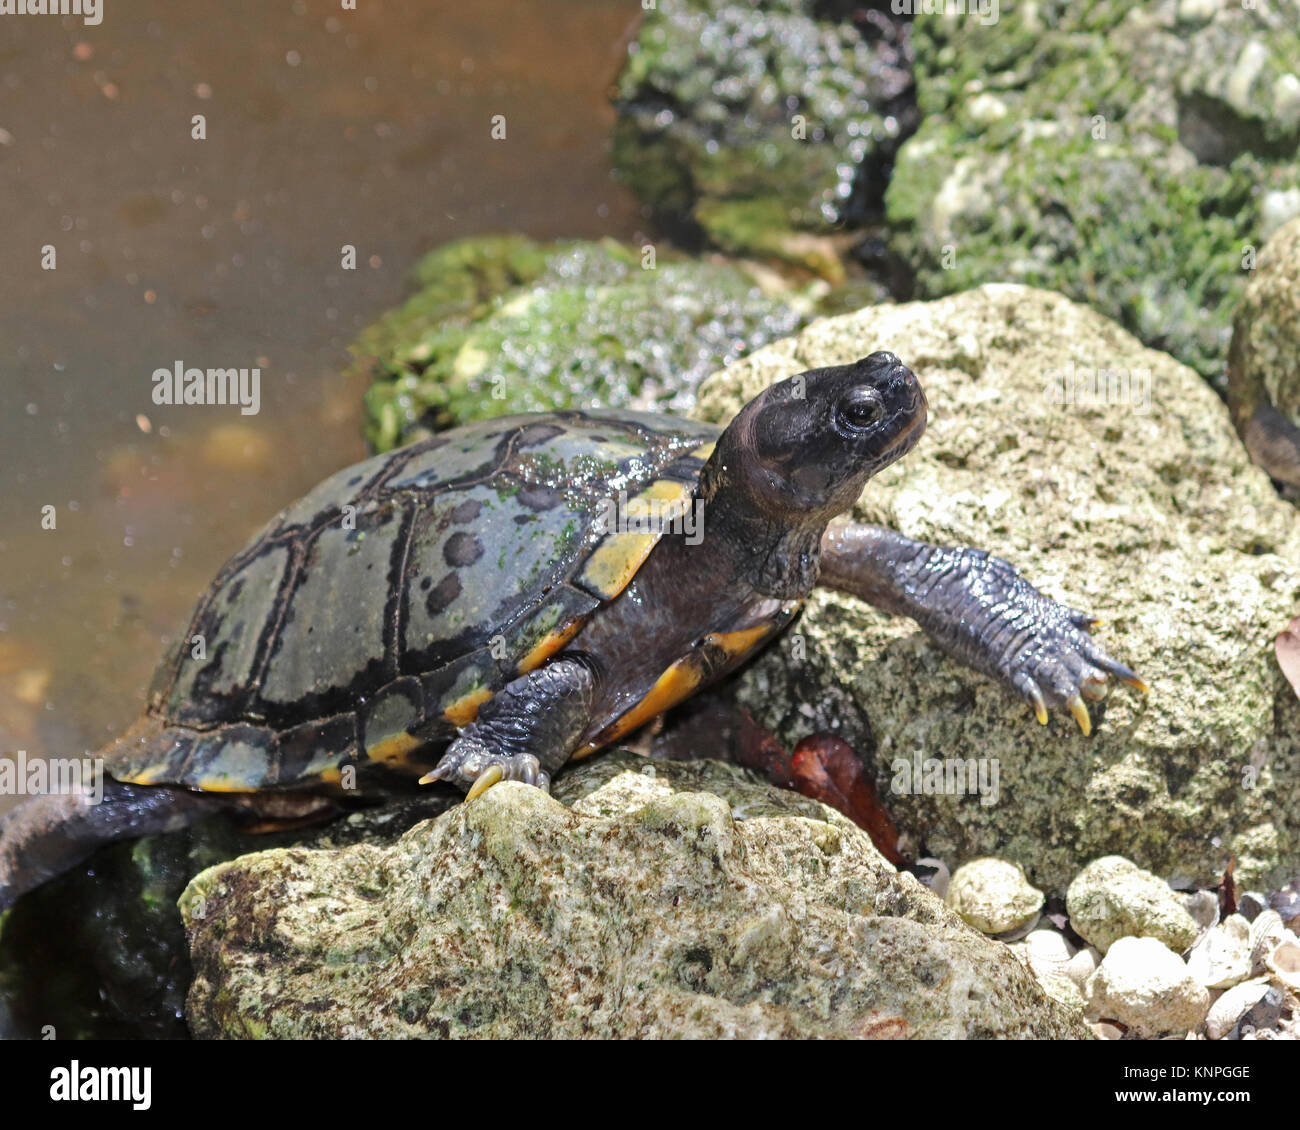 Fresh water turtle climbing out of a pond in Florida Stock Photo